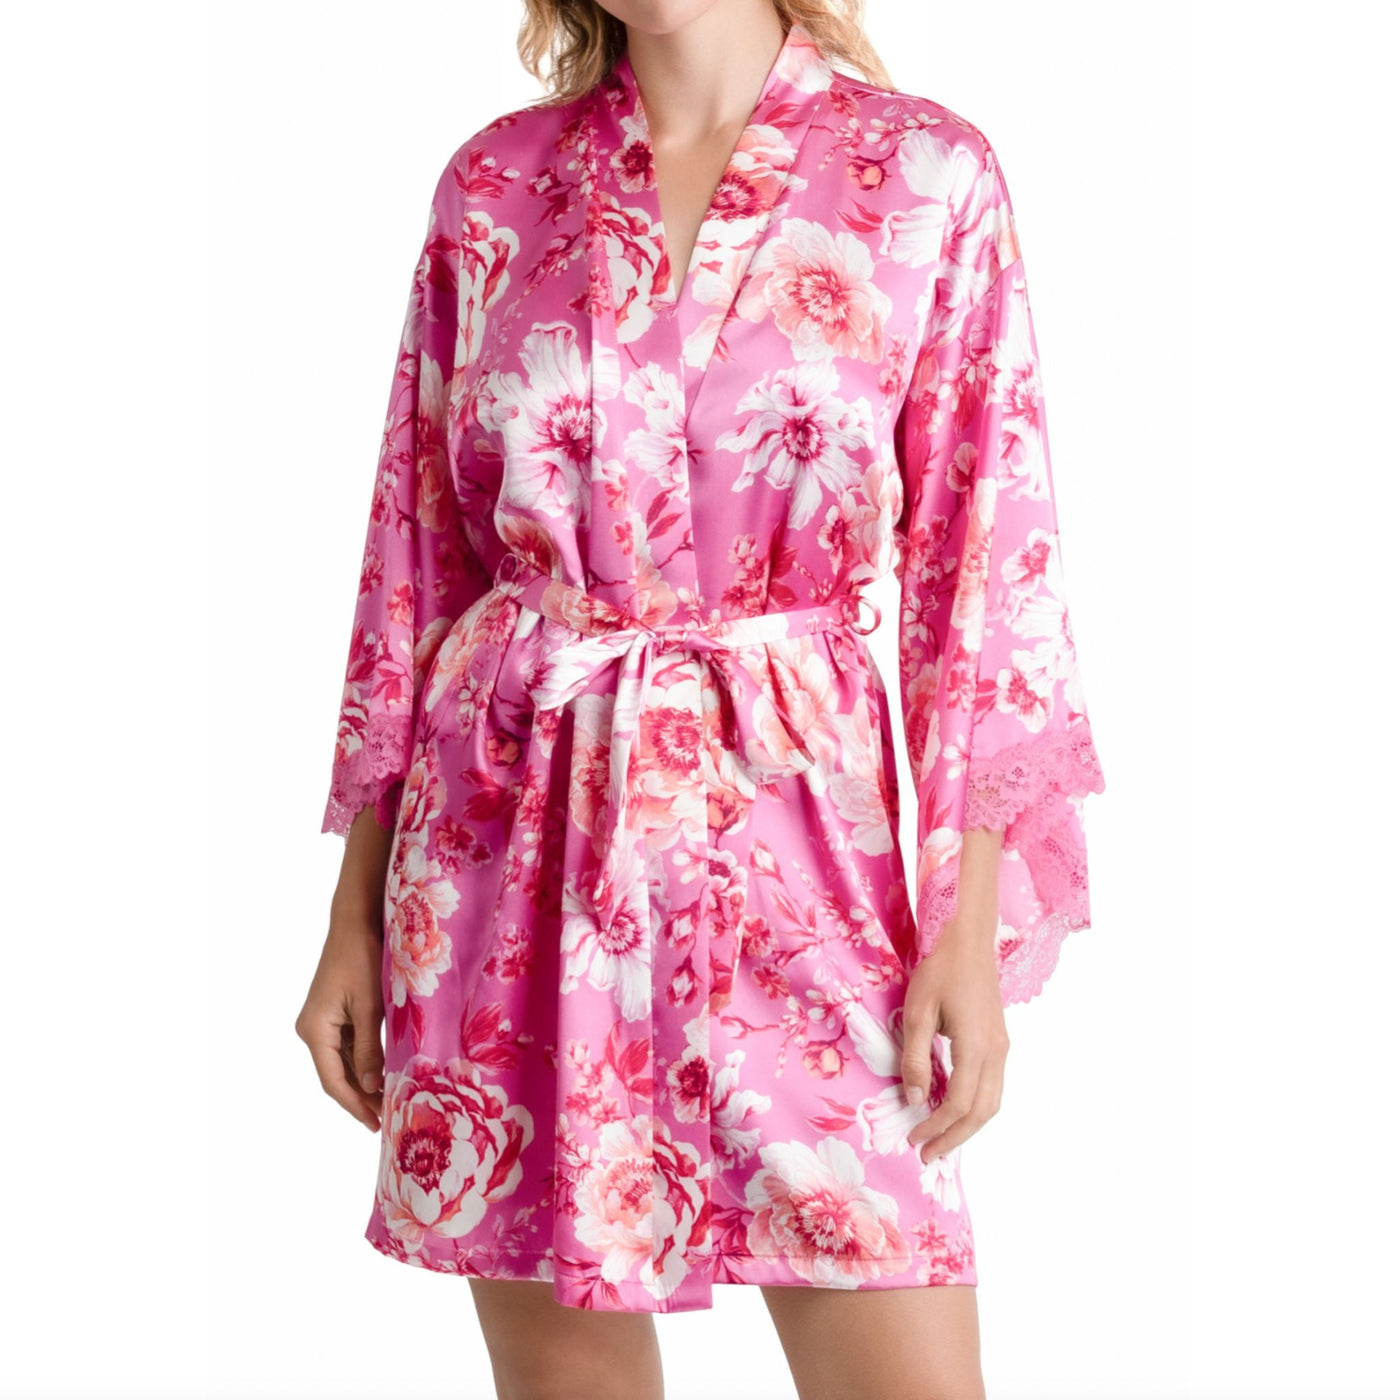 Jonquil My Valentine Robe in Rose Chaud MVT130-Robes-Jonquil in Bloom-Rose Chaud-XSmall/Small-Anna Bella Fine Lingerie, Reveal Your Most Gorgeous Self!